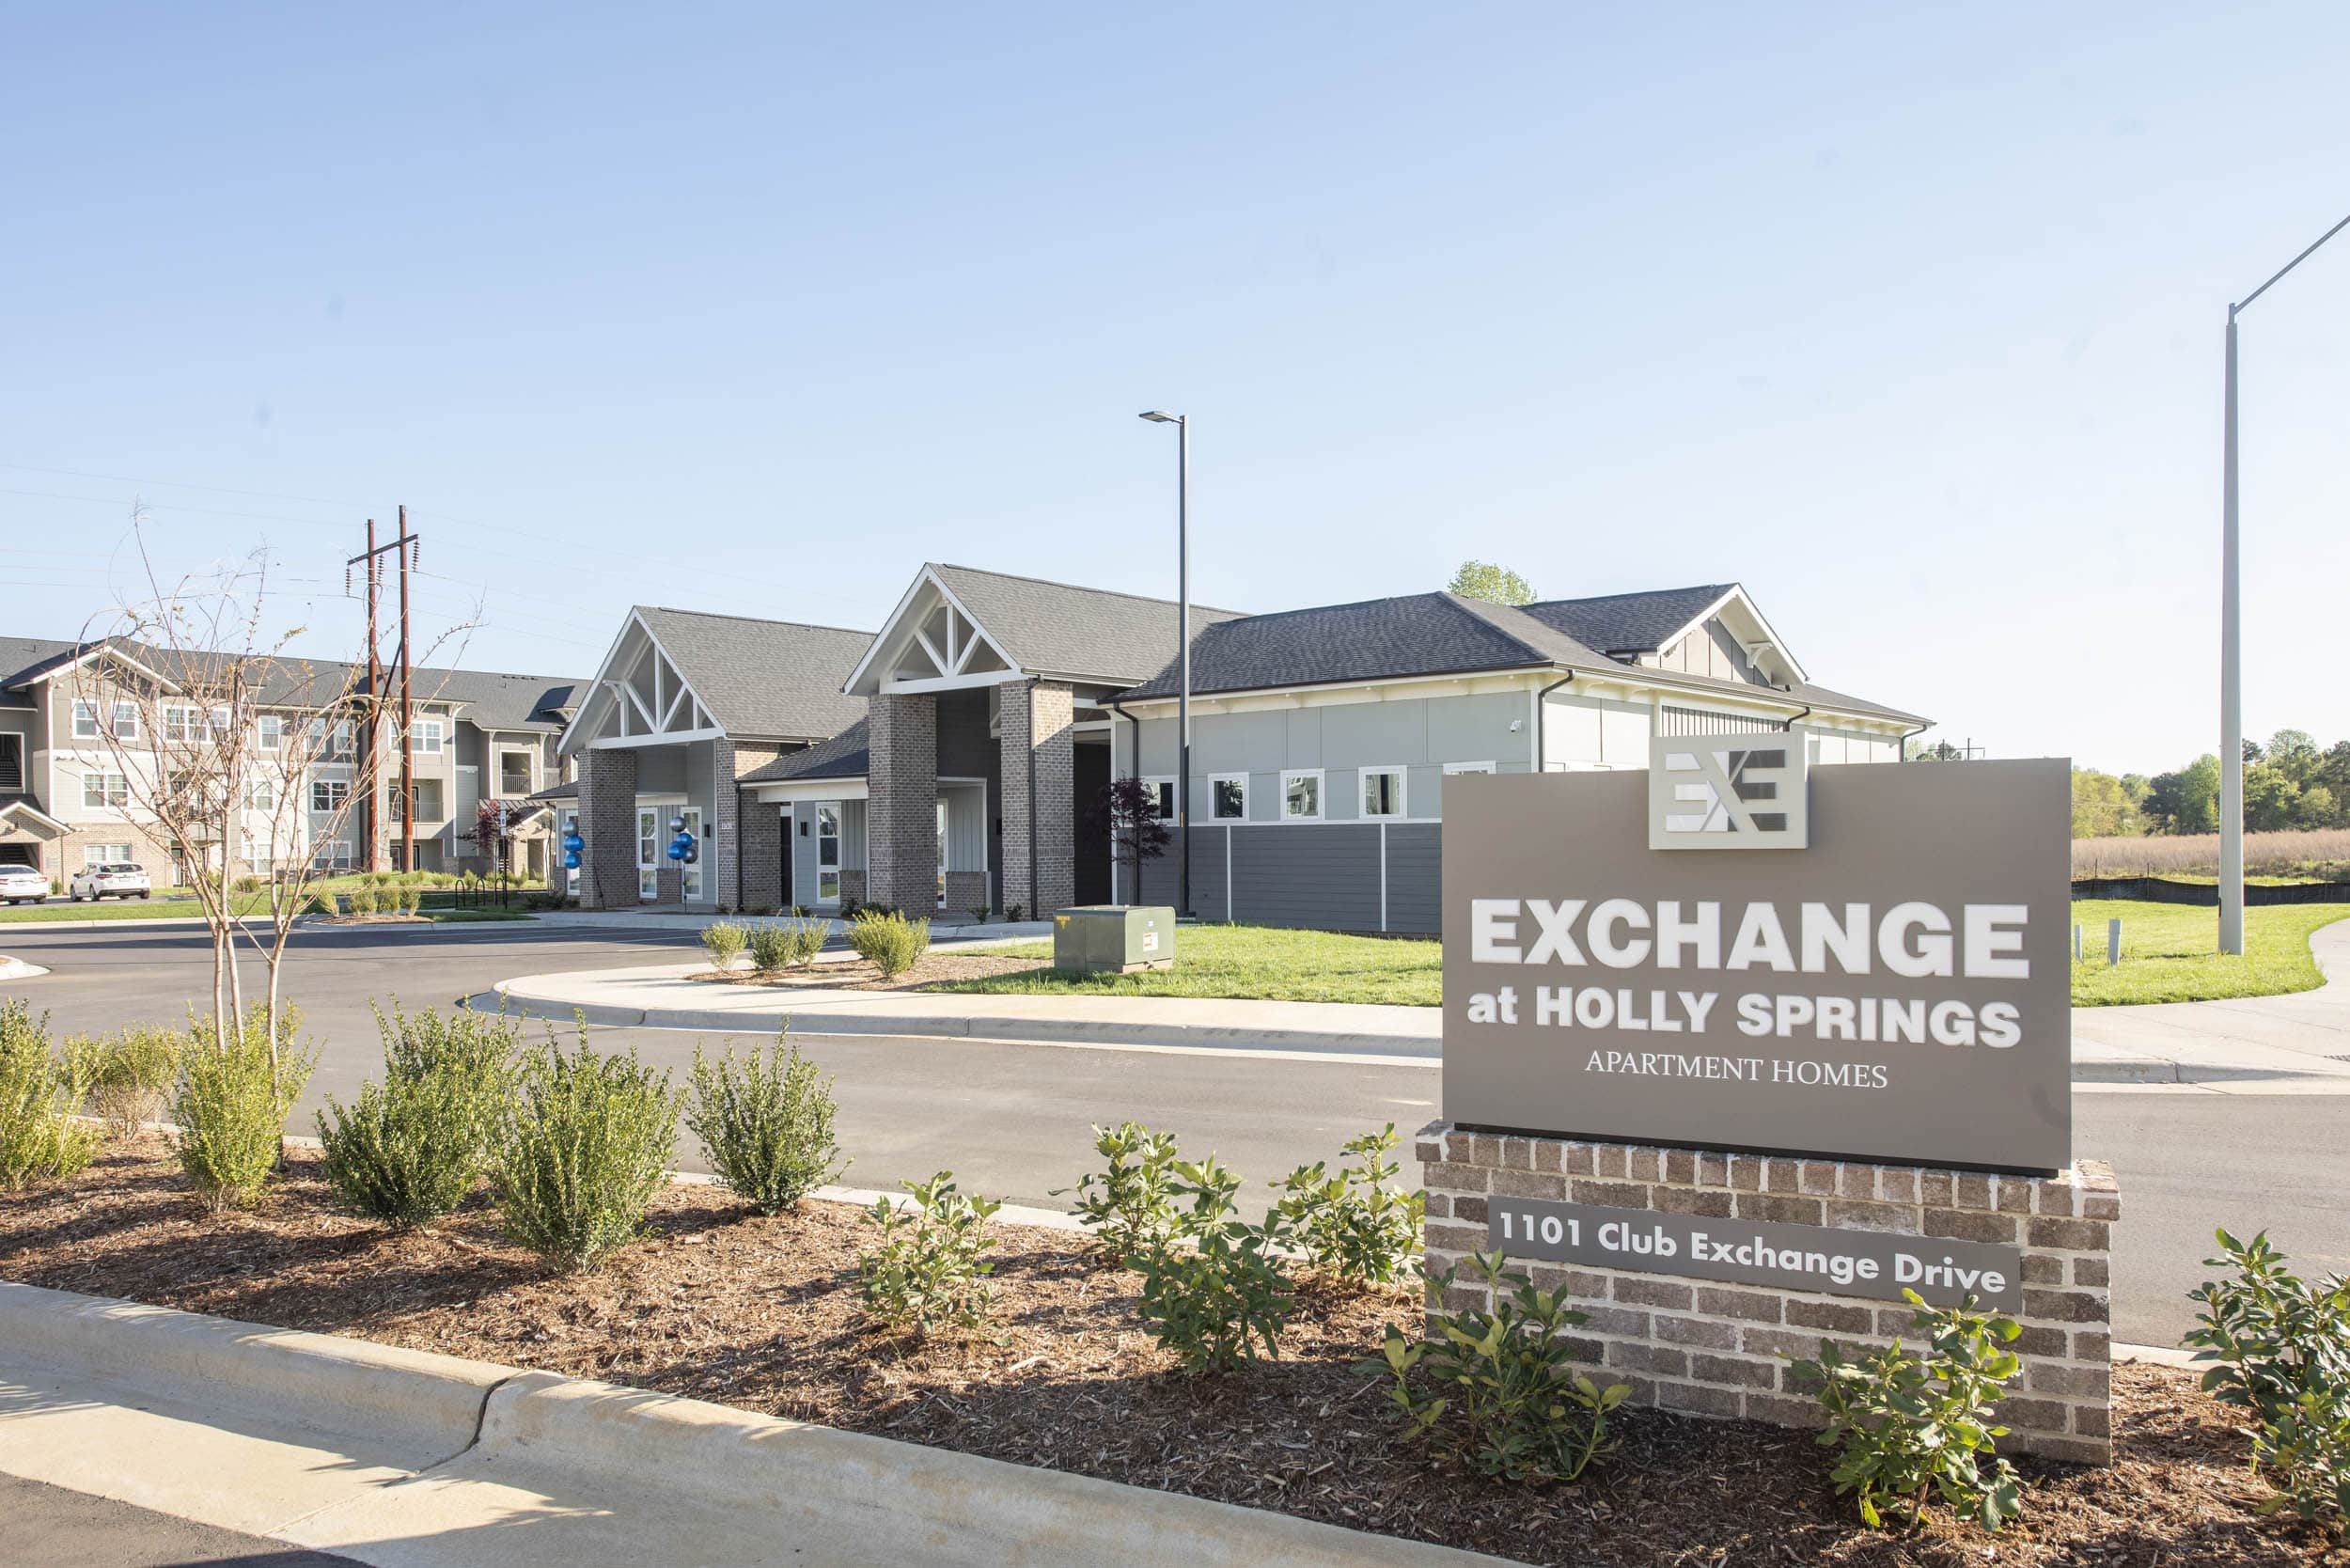 Exchange At Holly Springs Apartments For Rent In North Carolina